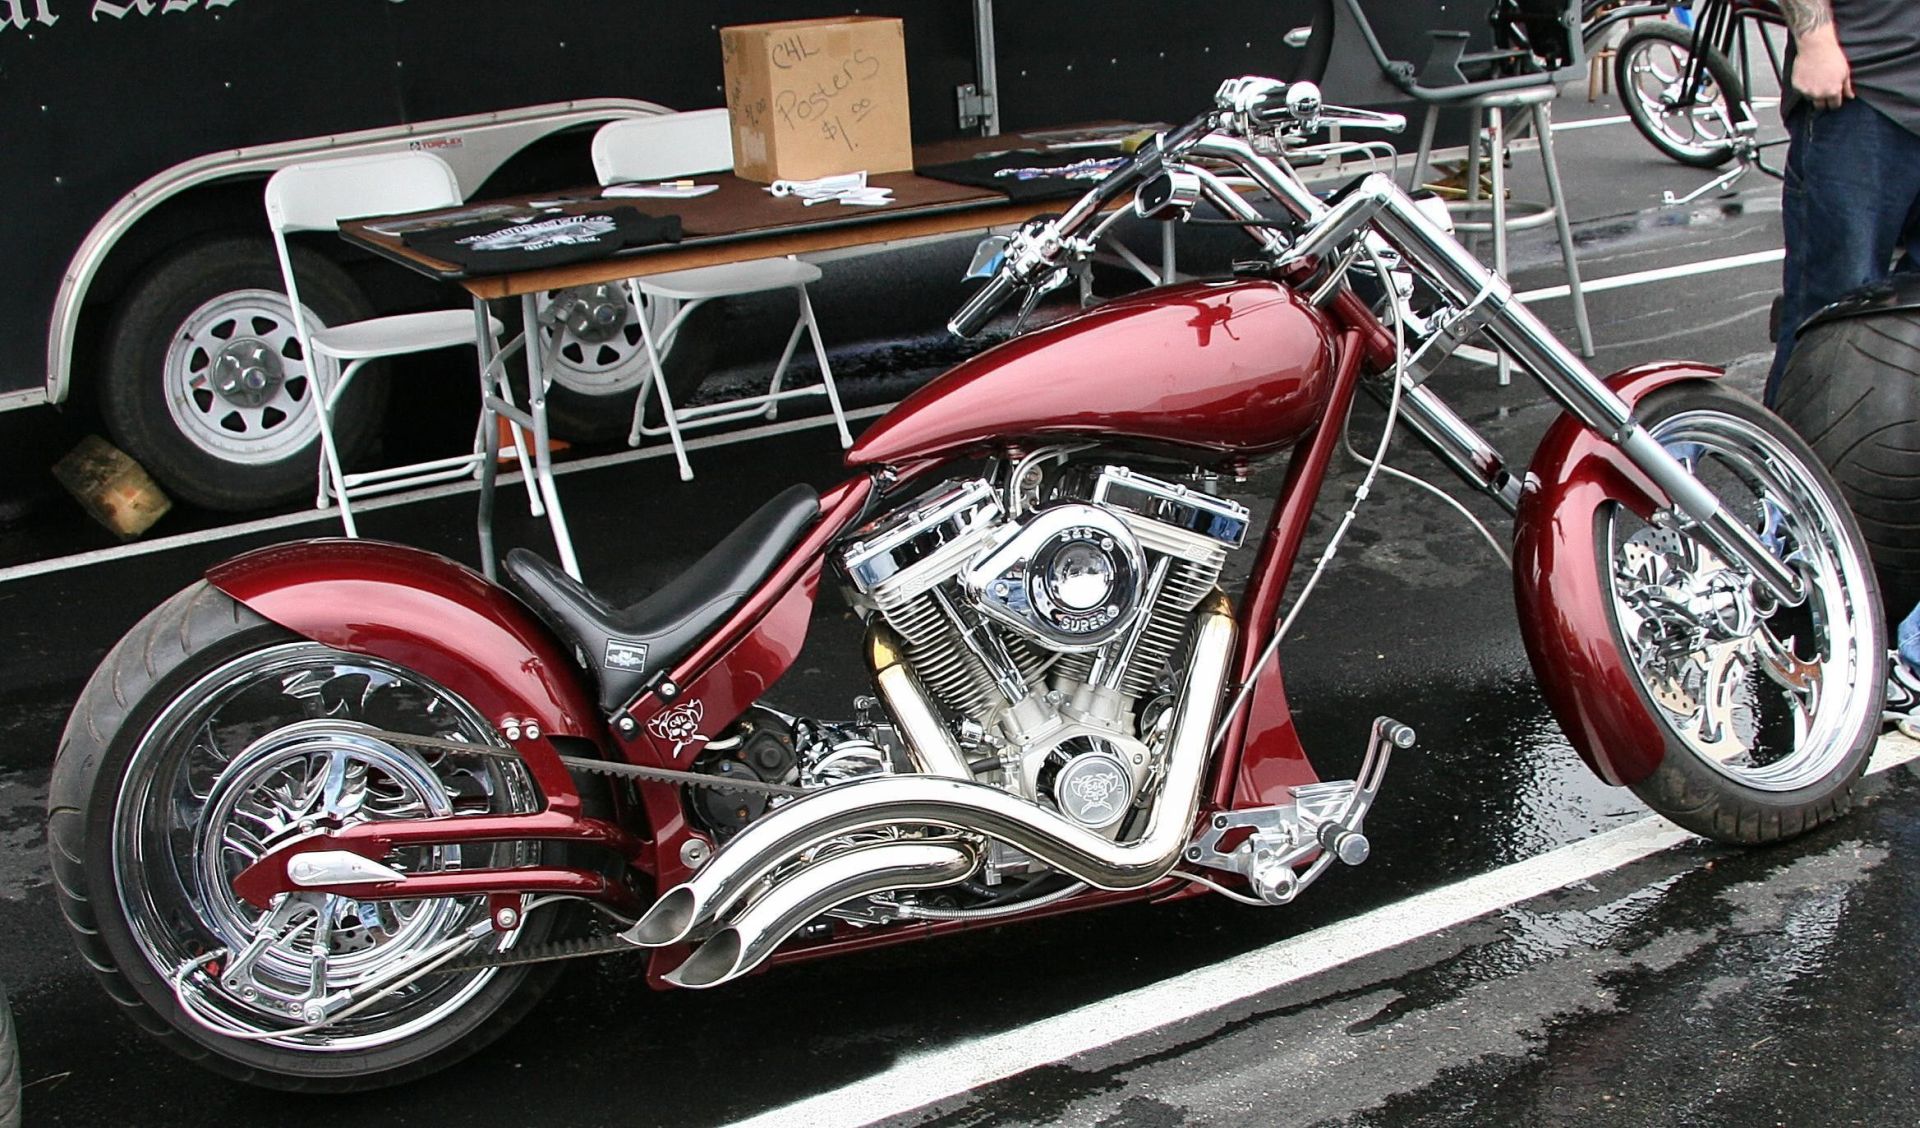 Chopper Hd Image Submitted By Ravina - Motos Chopper - HD Wallpaper 